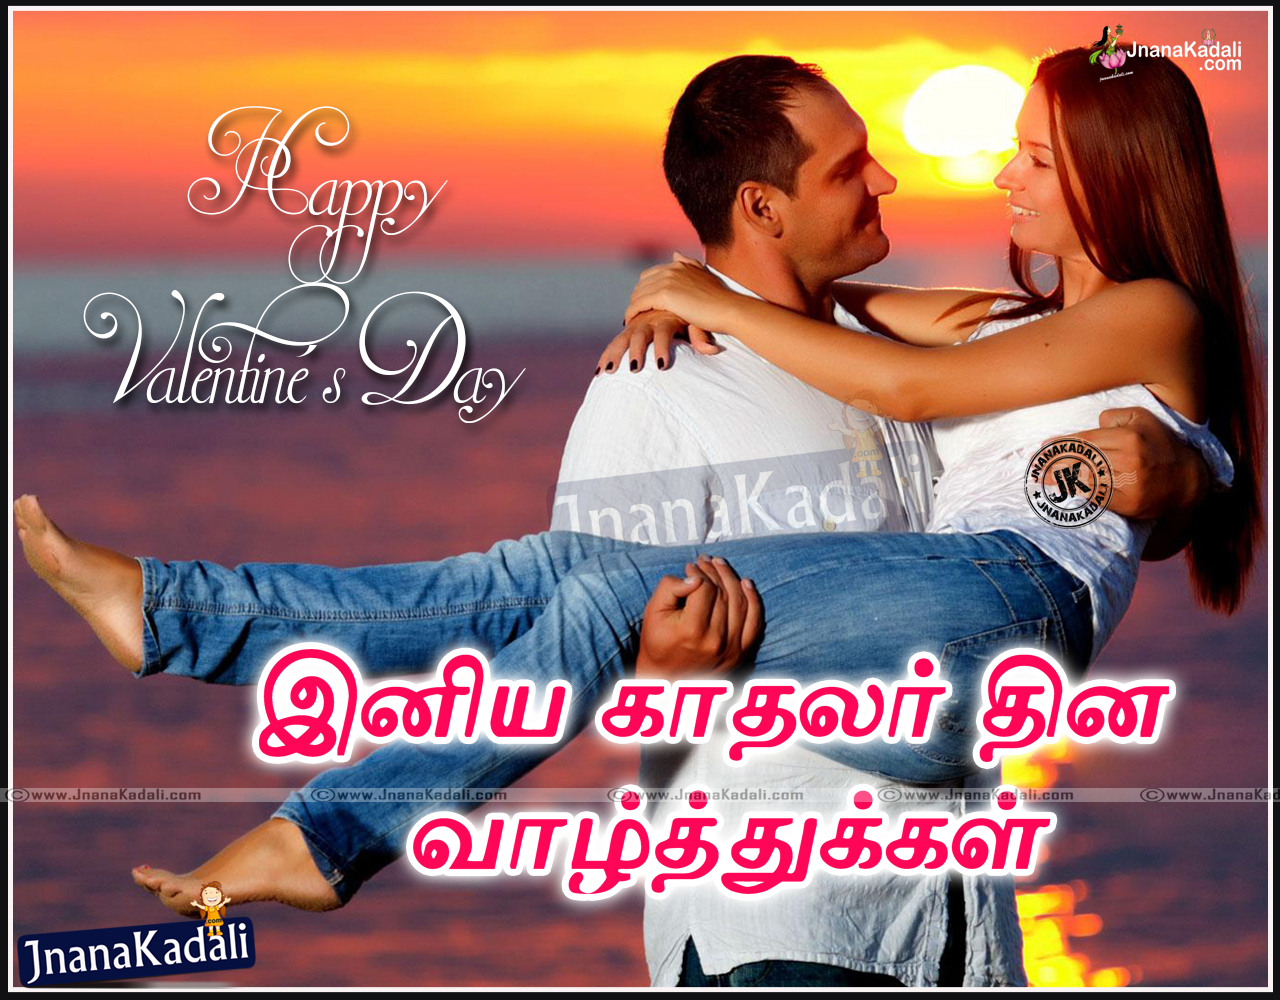 Tamil Lovers Day / Valentines Day Poems and Quotations JNANA KADALI